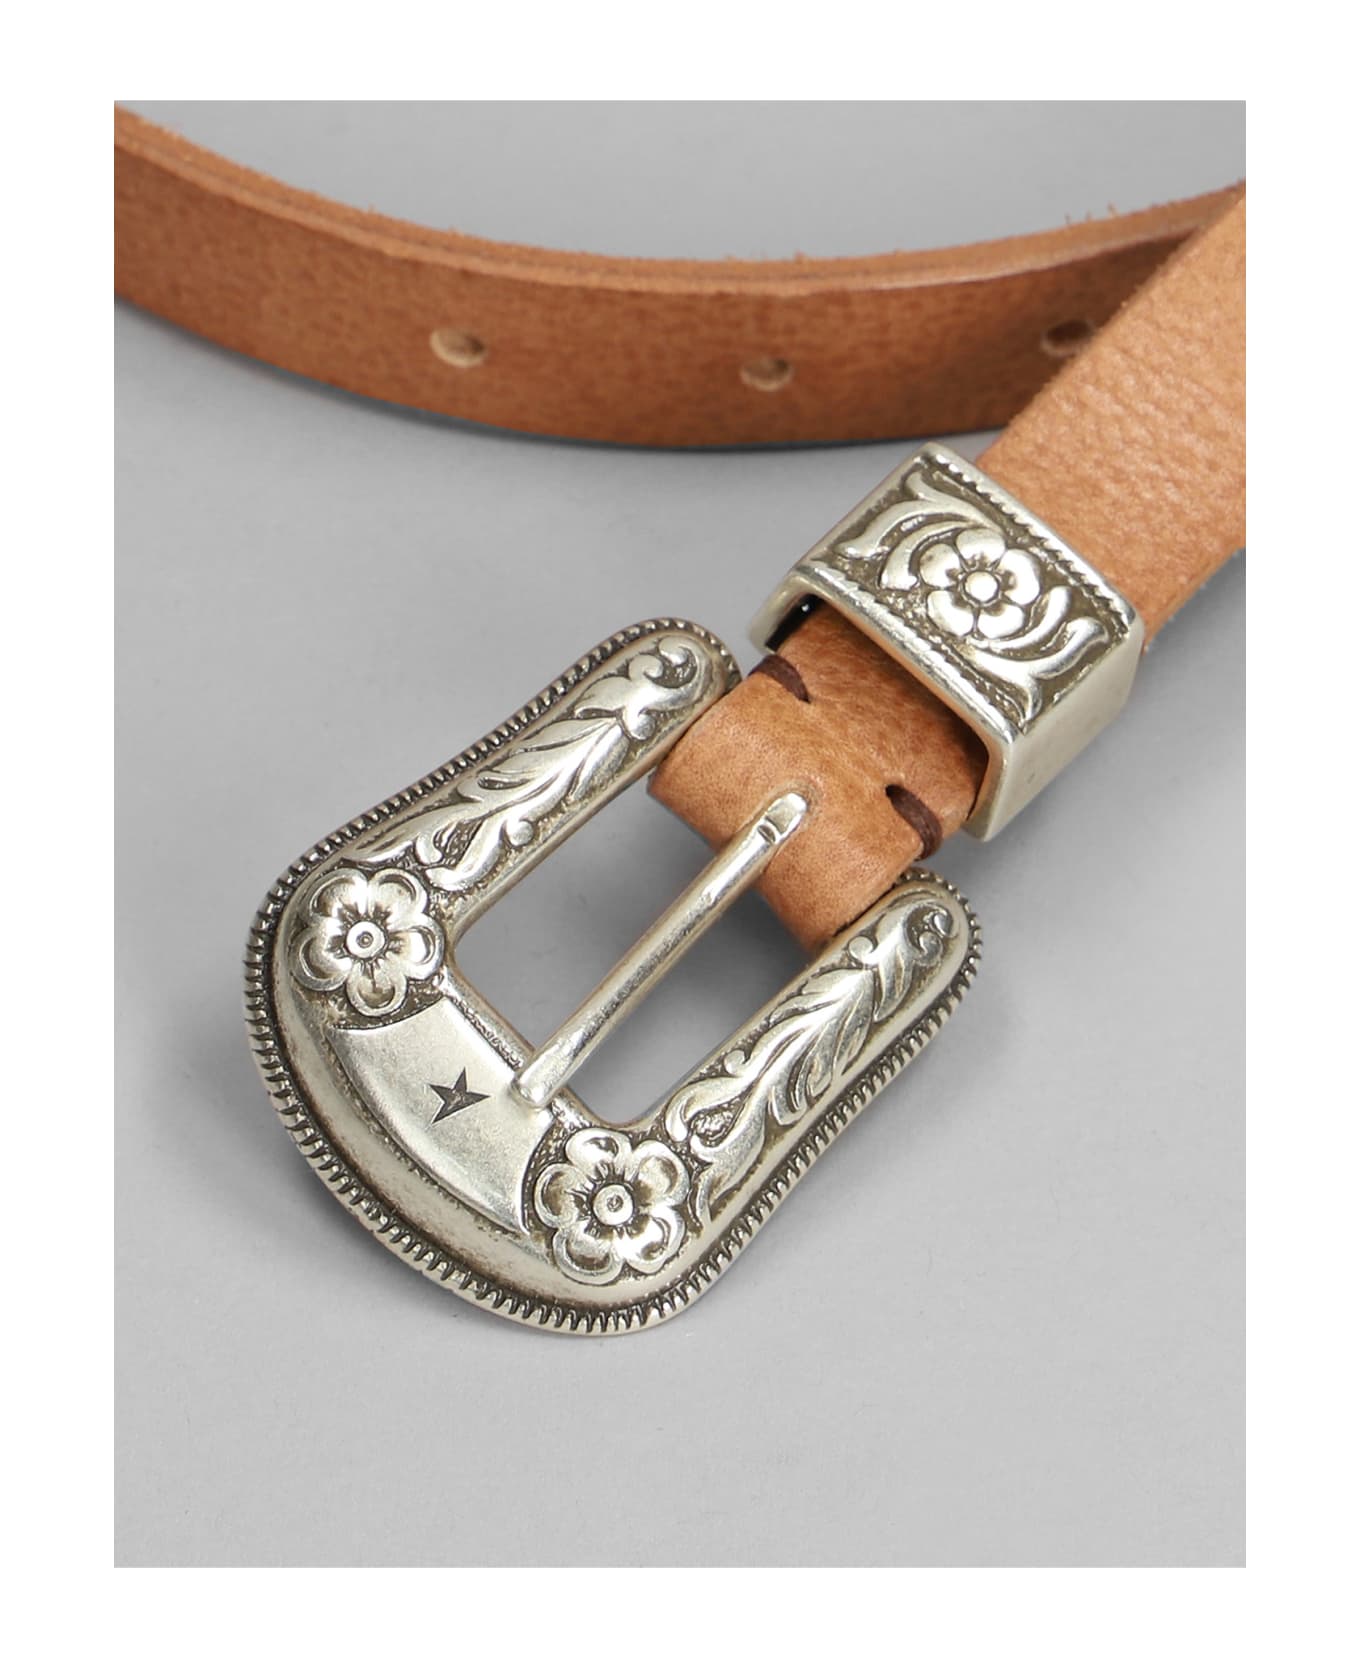 Golden Goose Belts In Leather Color Leather - leather color